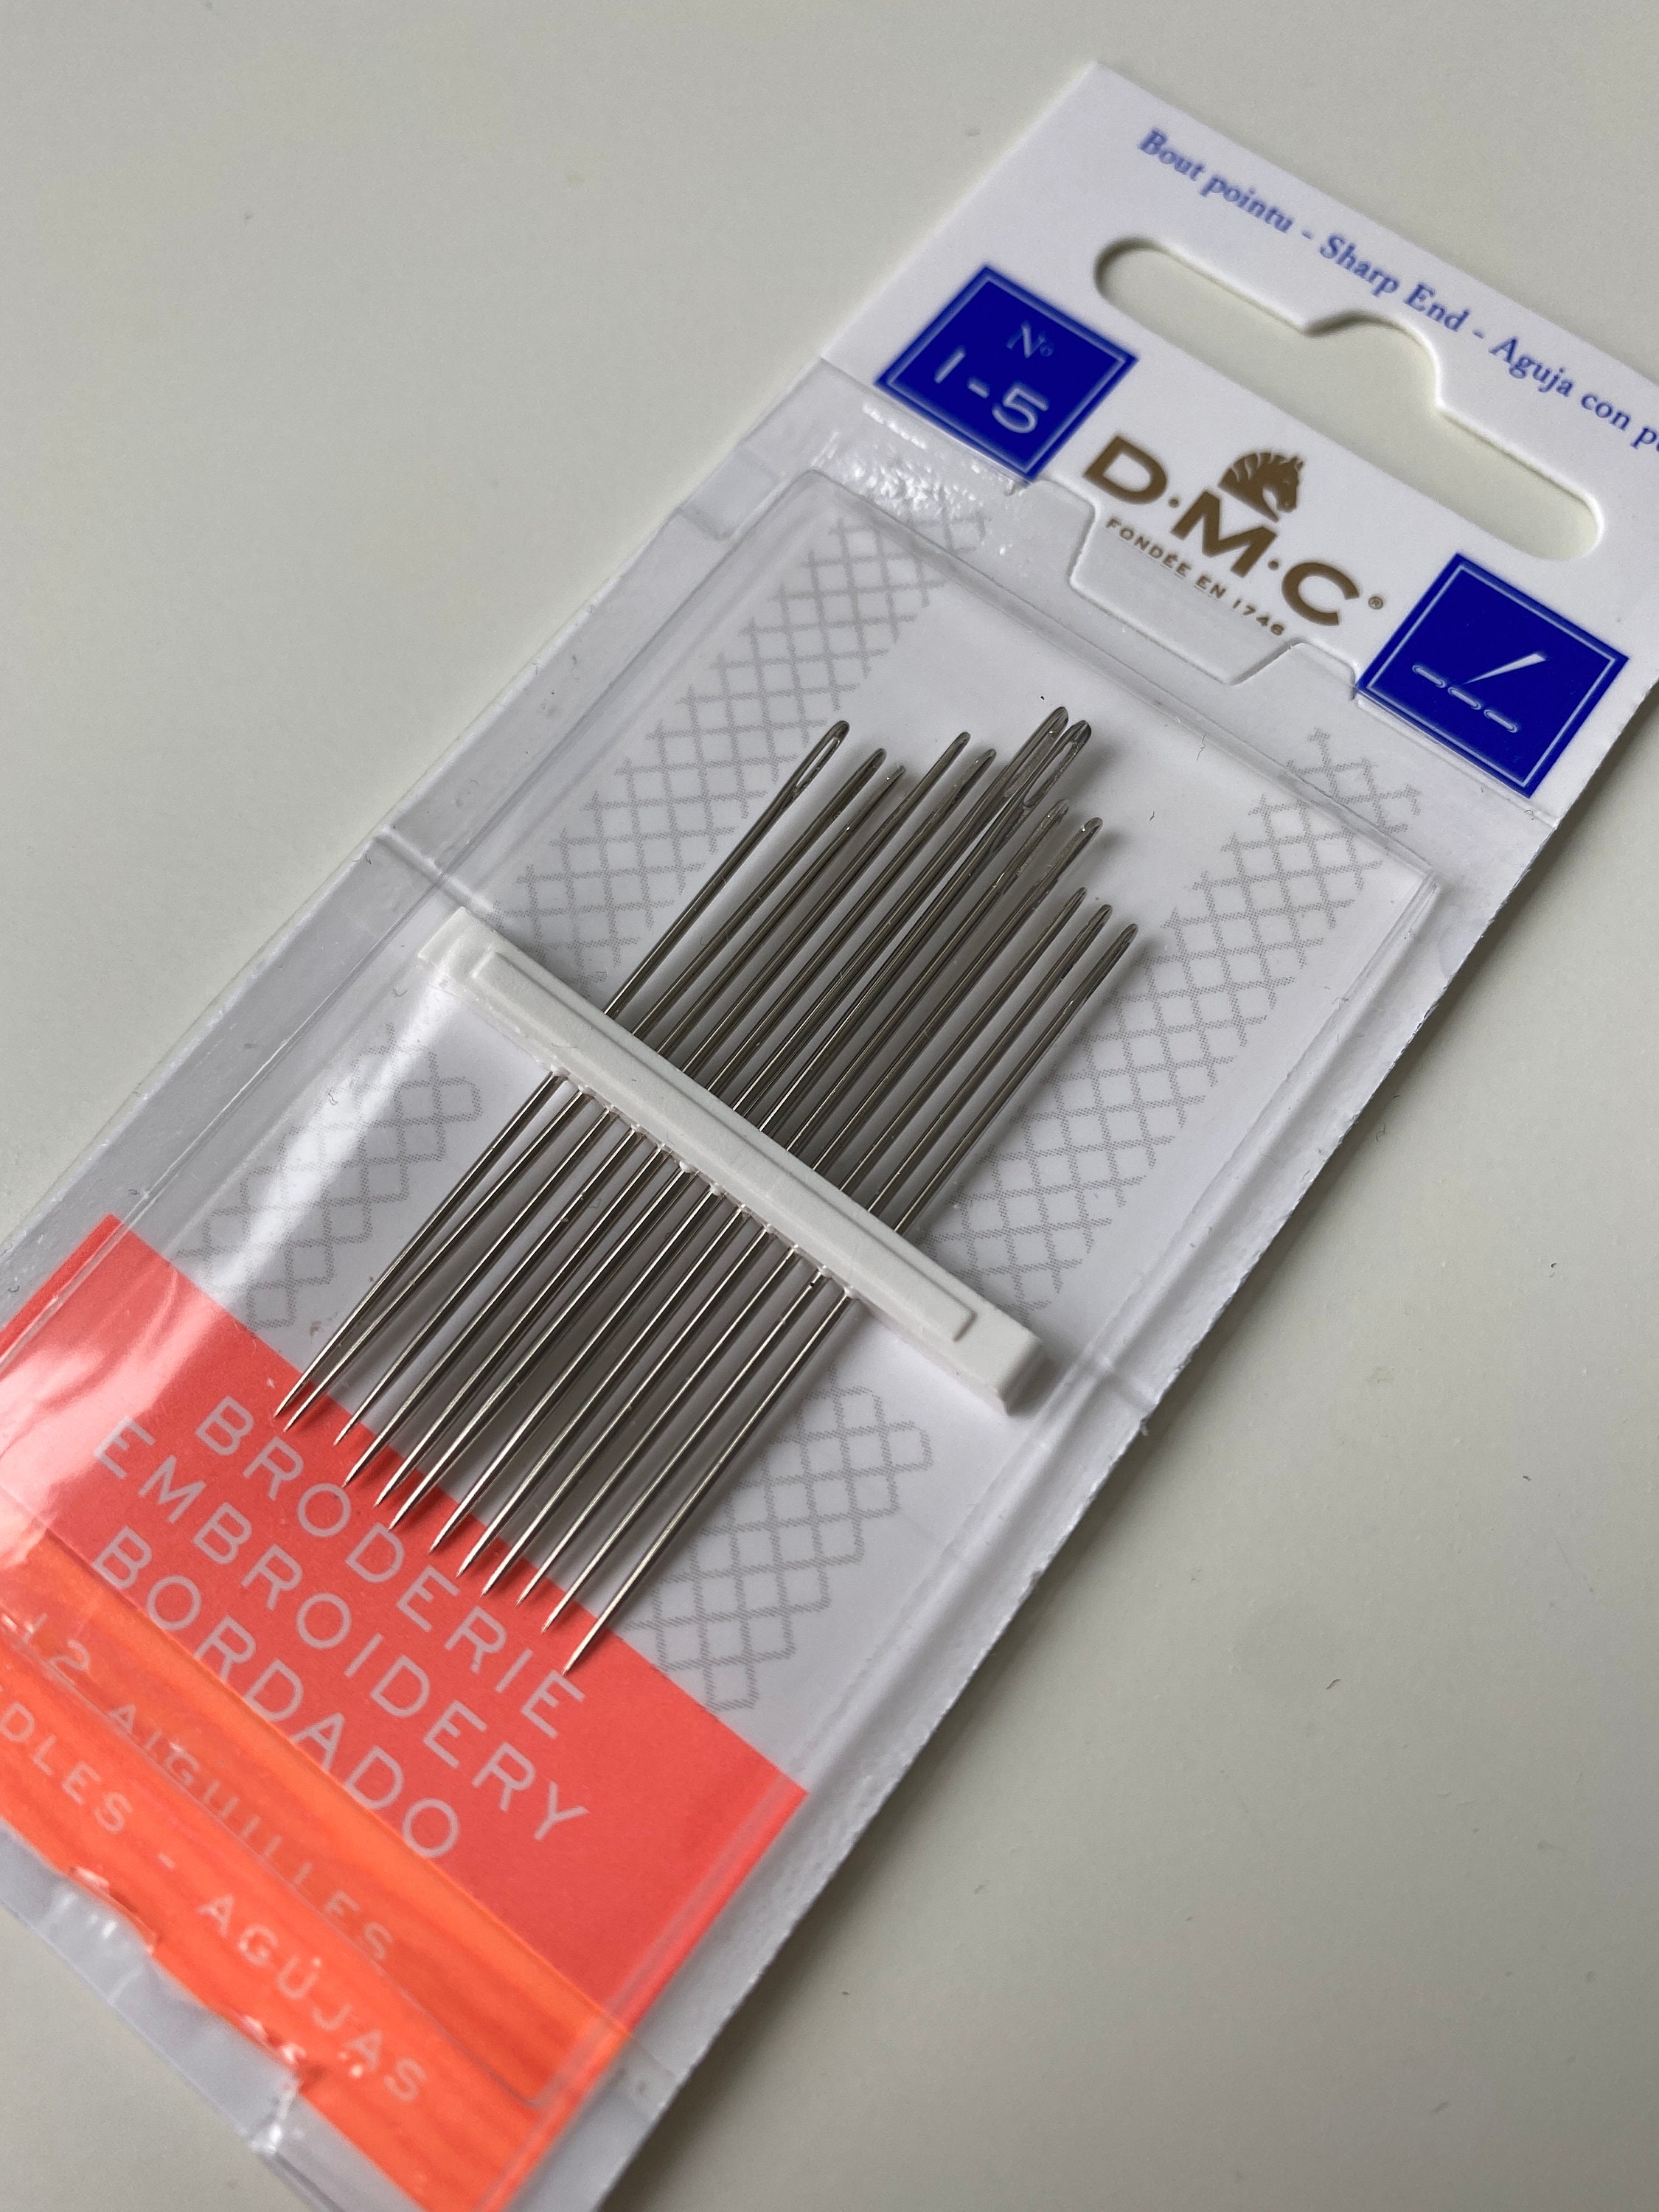 Embroidery Needles - size 5/10, Accessories